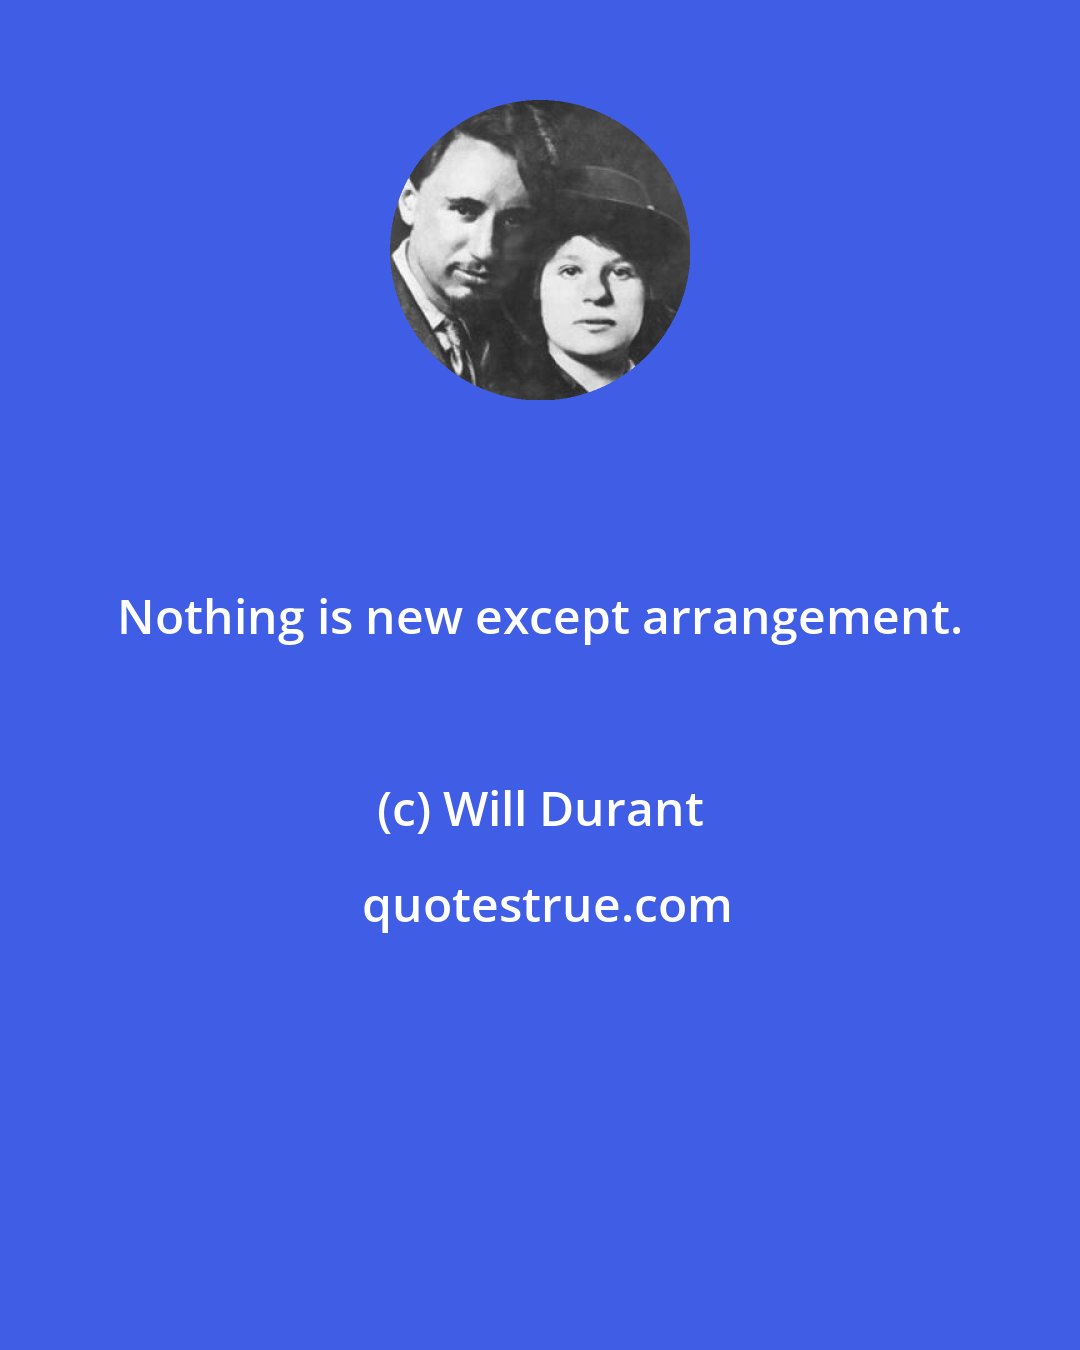 Will Durant: Nothing is new except arrangement.